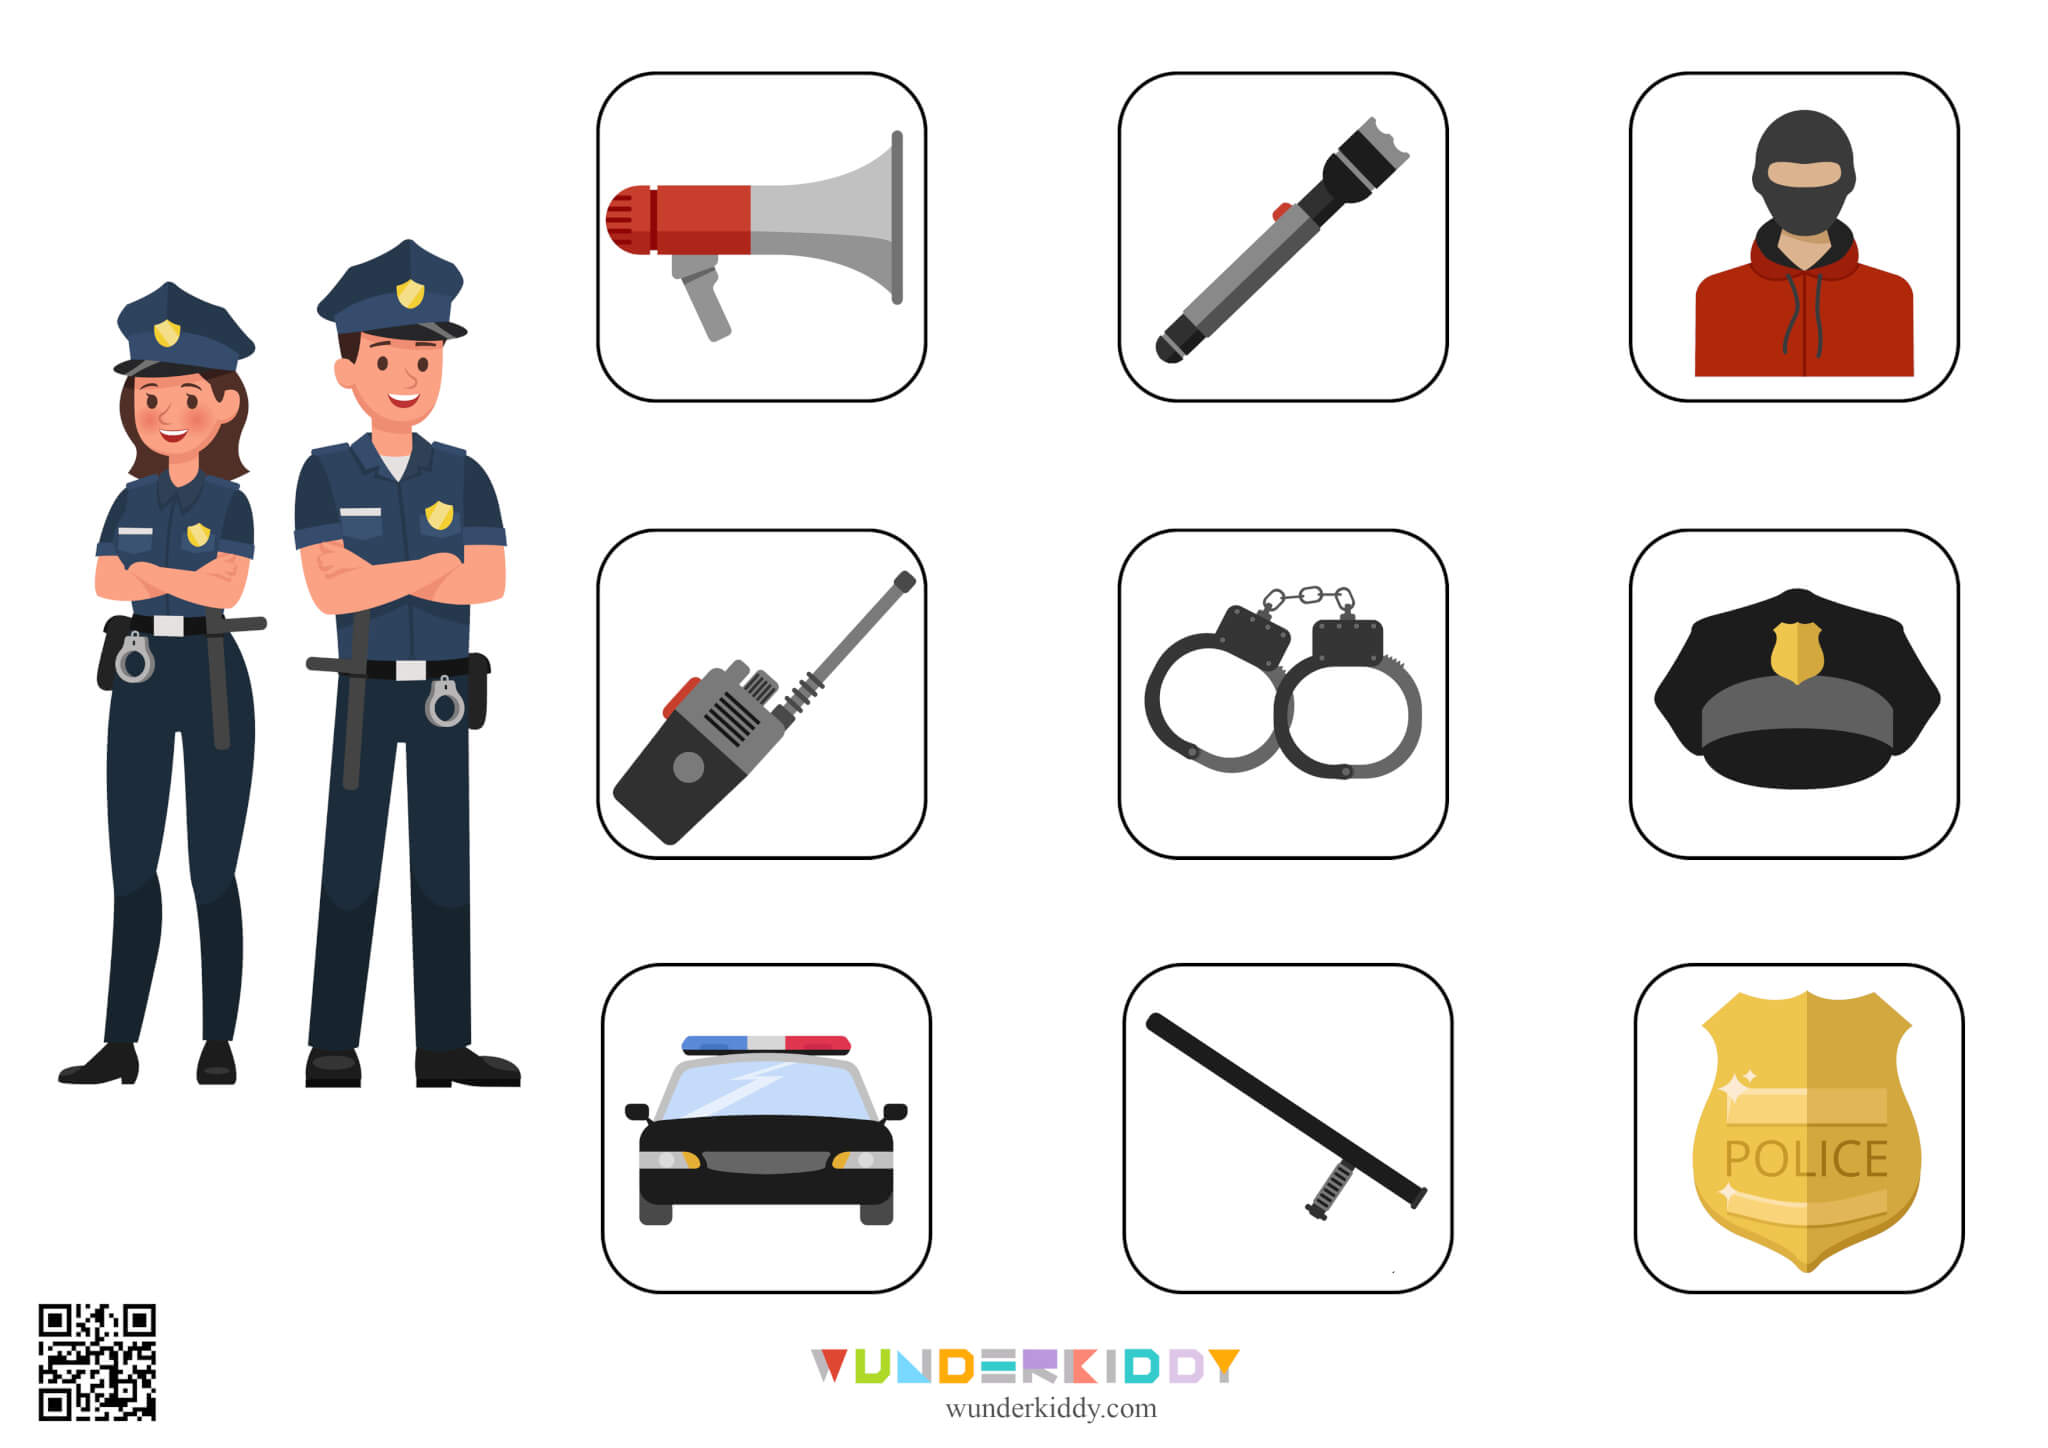 Sorting Worksheet Professions and Tools - Image 4